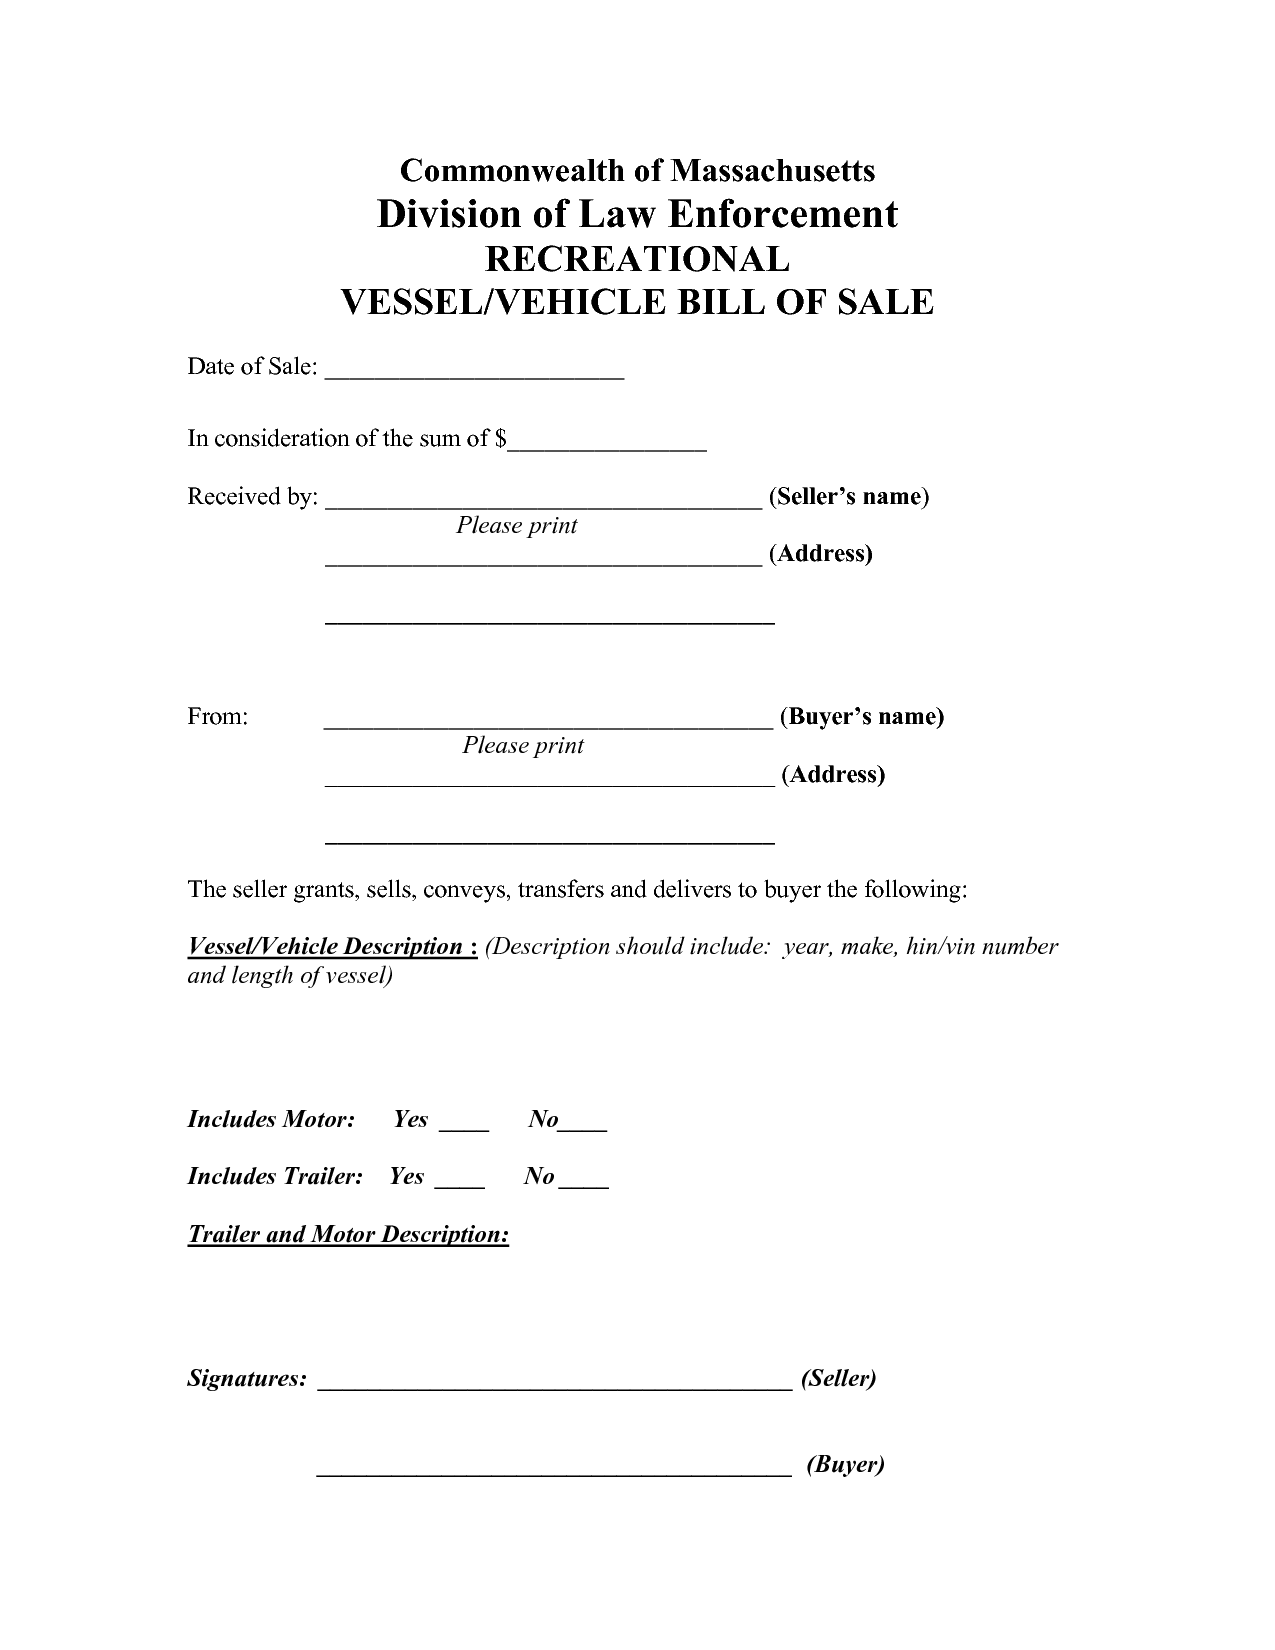 travel-trailer-bill-of-sale-free-printable-documents